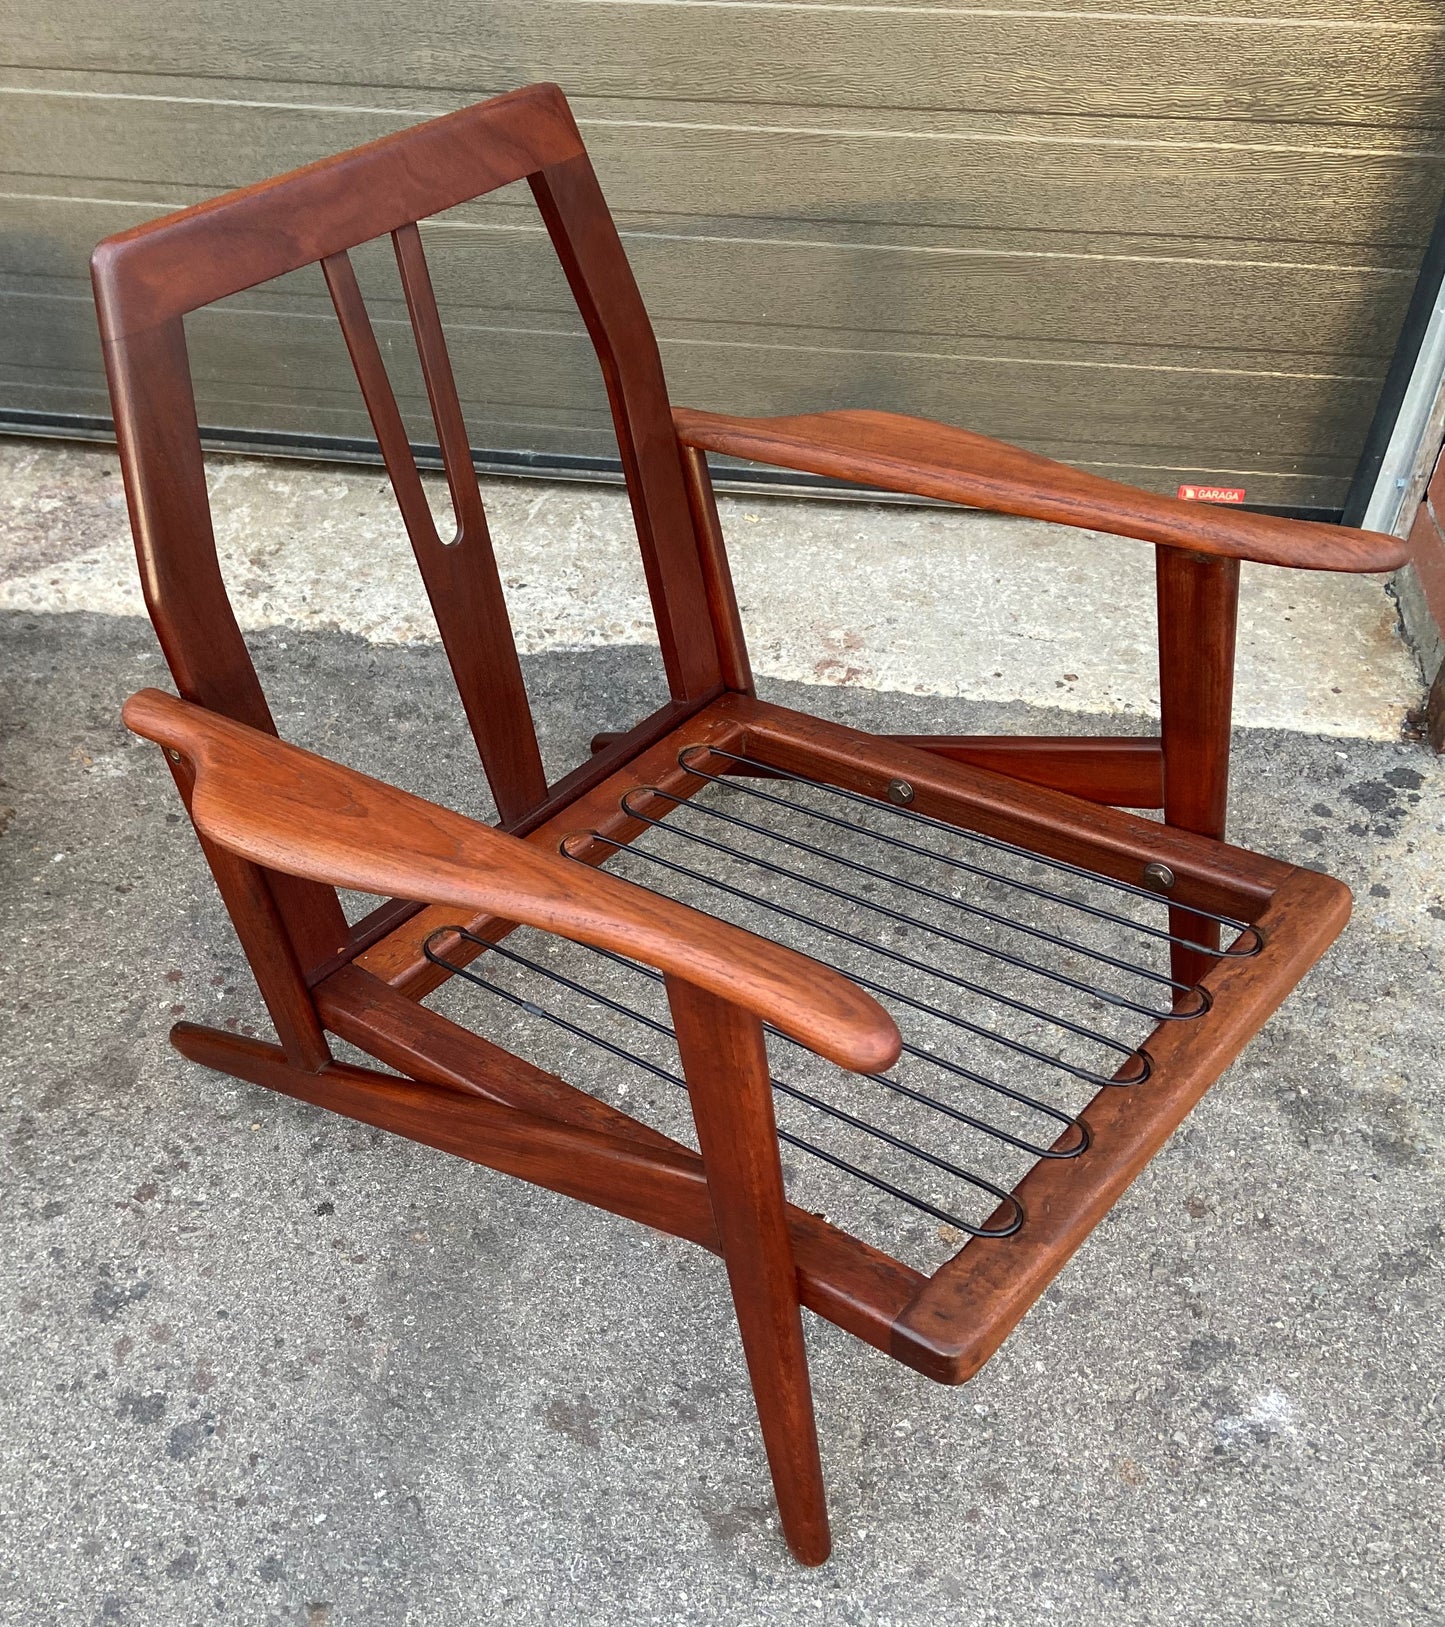 REFINISHED REUPHOLSTERED Danish Mid-Century Modern Teak Lounge Chair by Komfort, Perfect